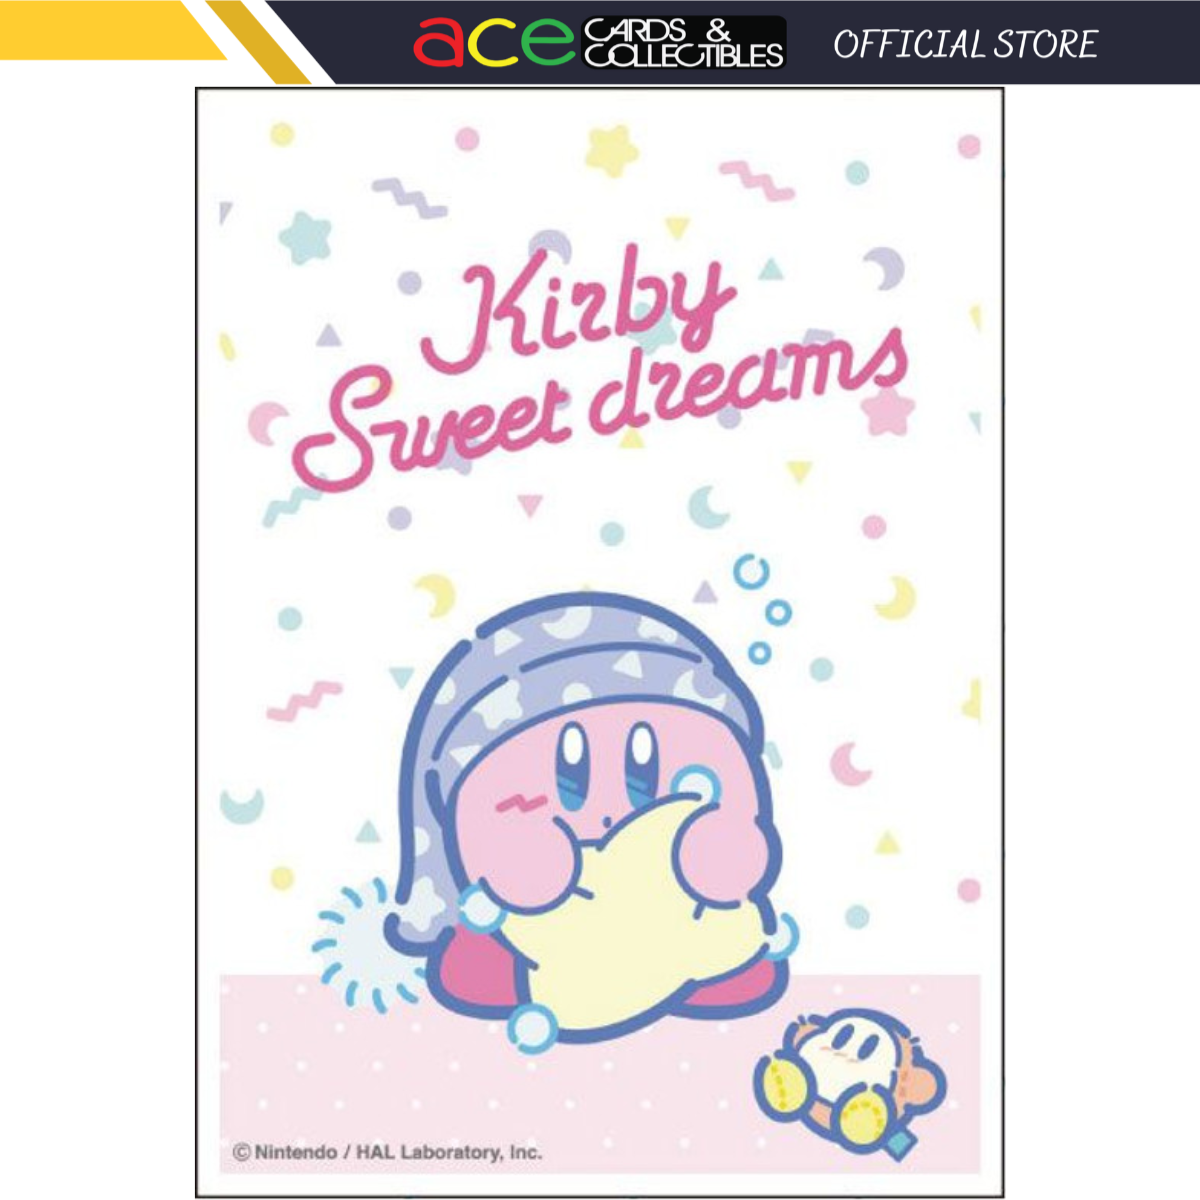 Ensky Character Sleeve - Kirby Horoscope "Good Night Reserve" [EN-1219]-Ensky-Ace Cards & Collectibles